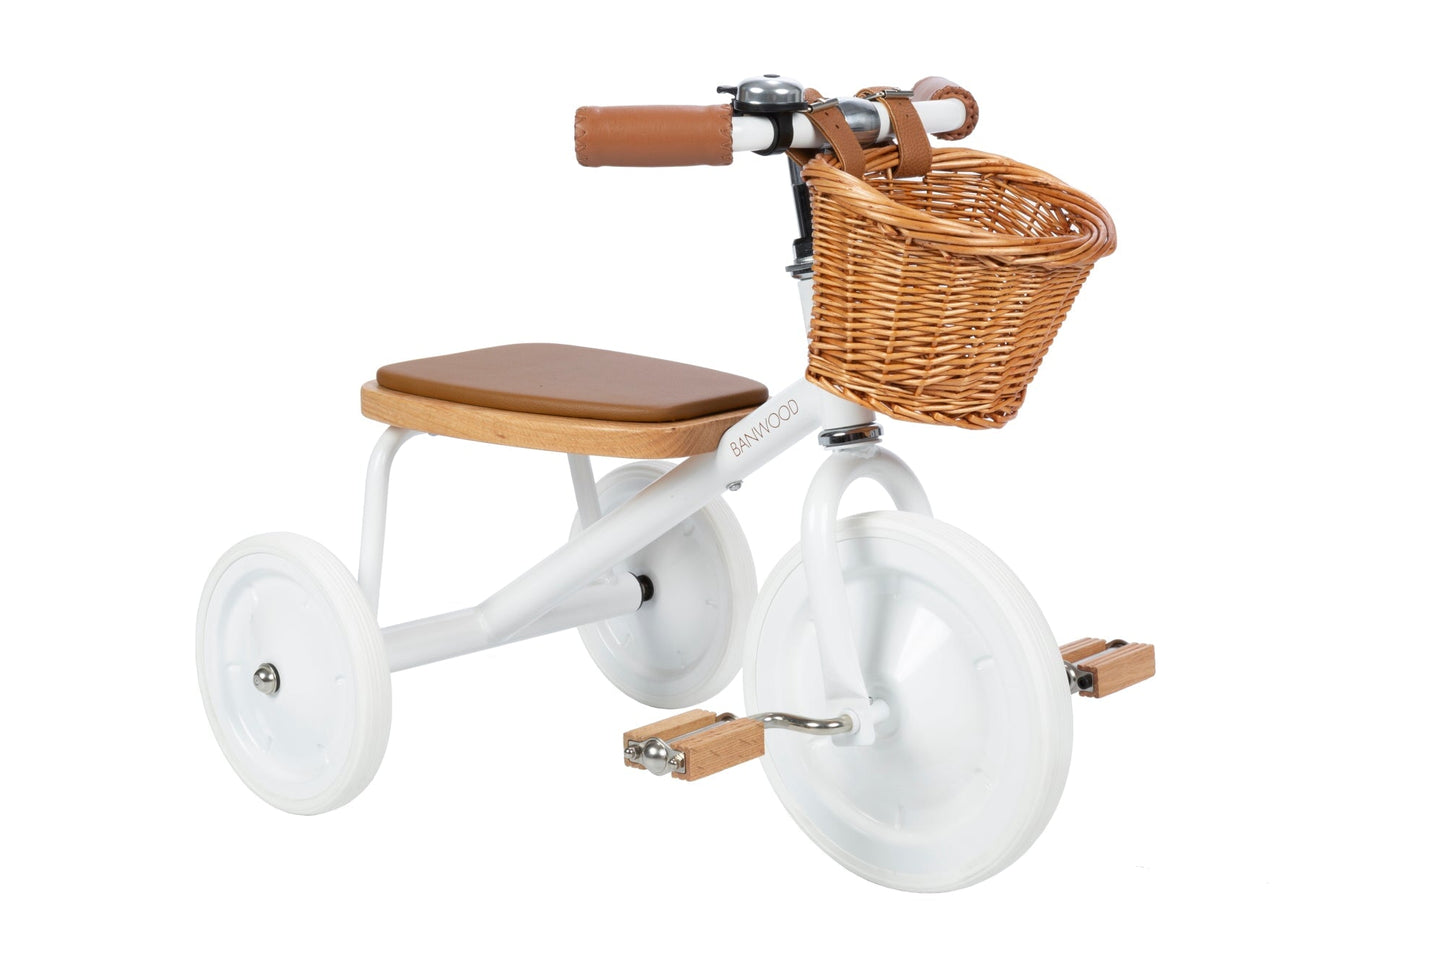 Tricycle by BANWOOD in Multiple Colors - Alder & Alouette